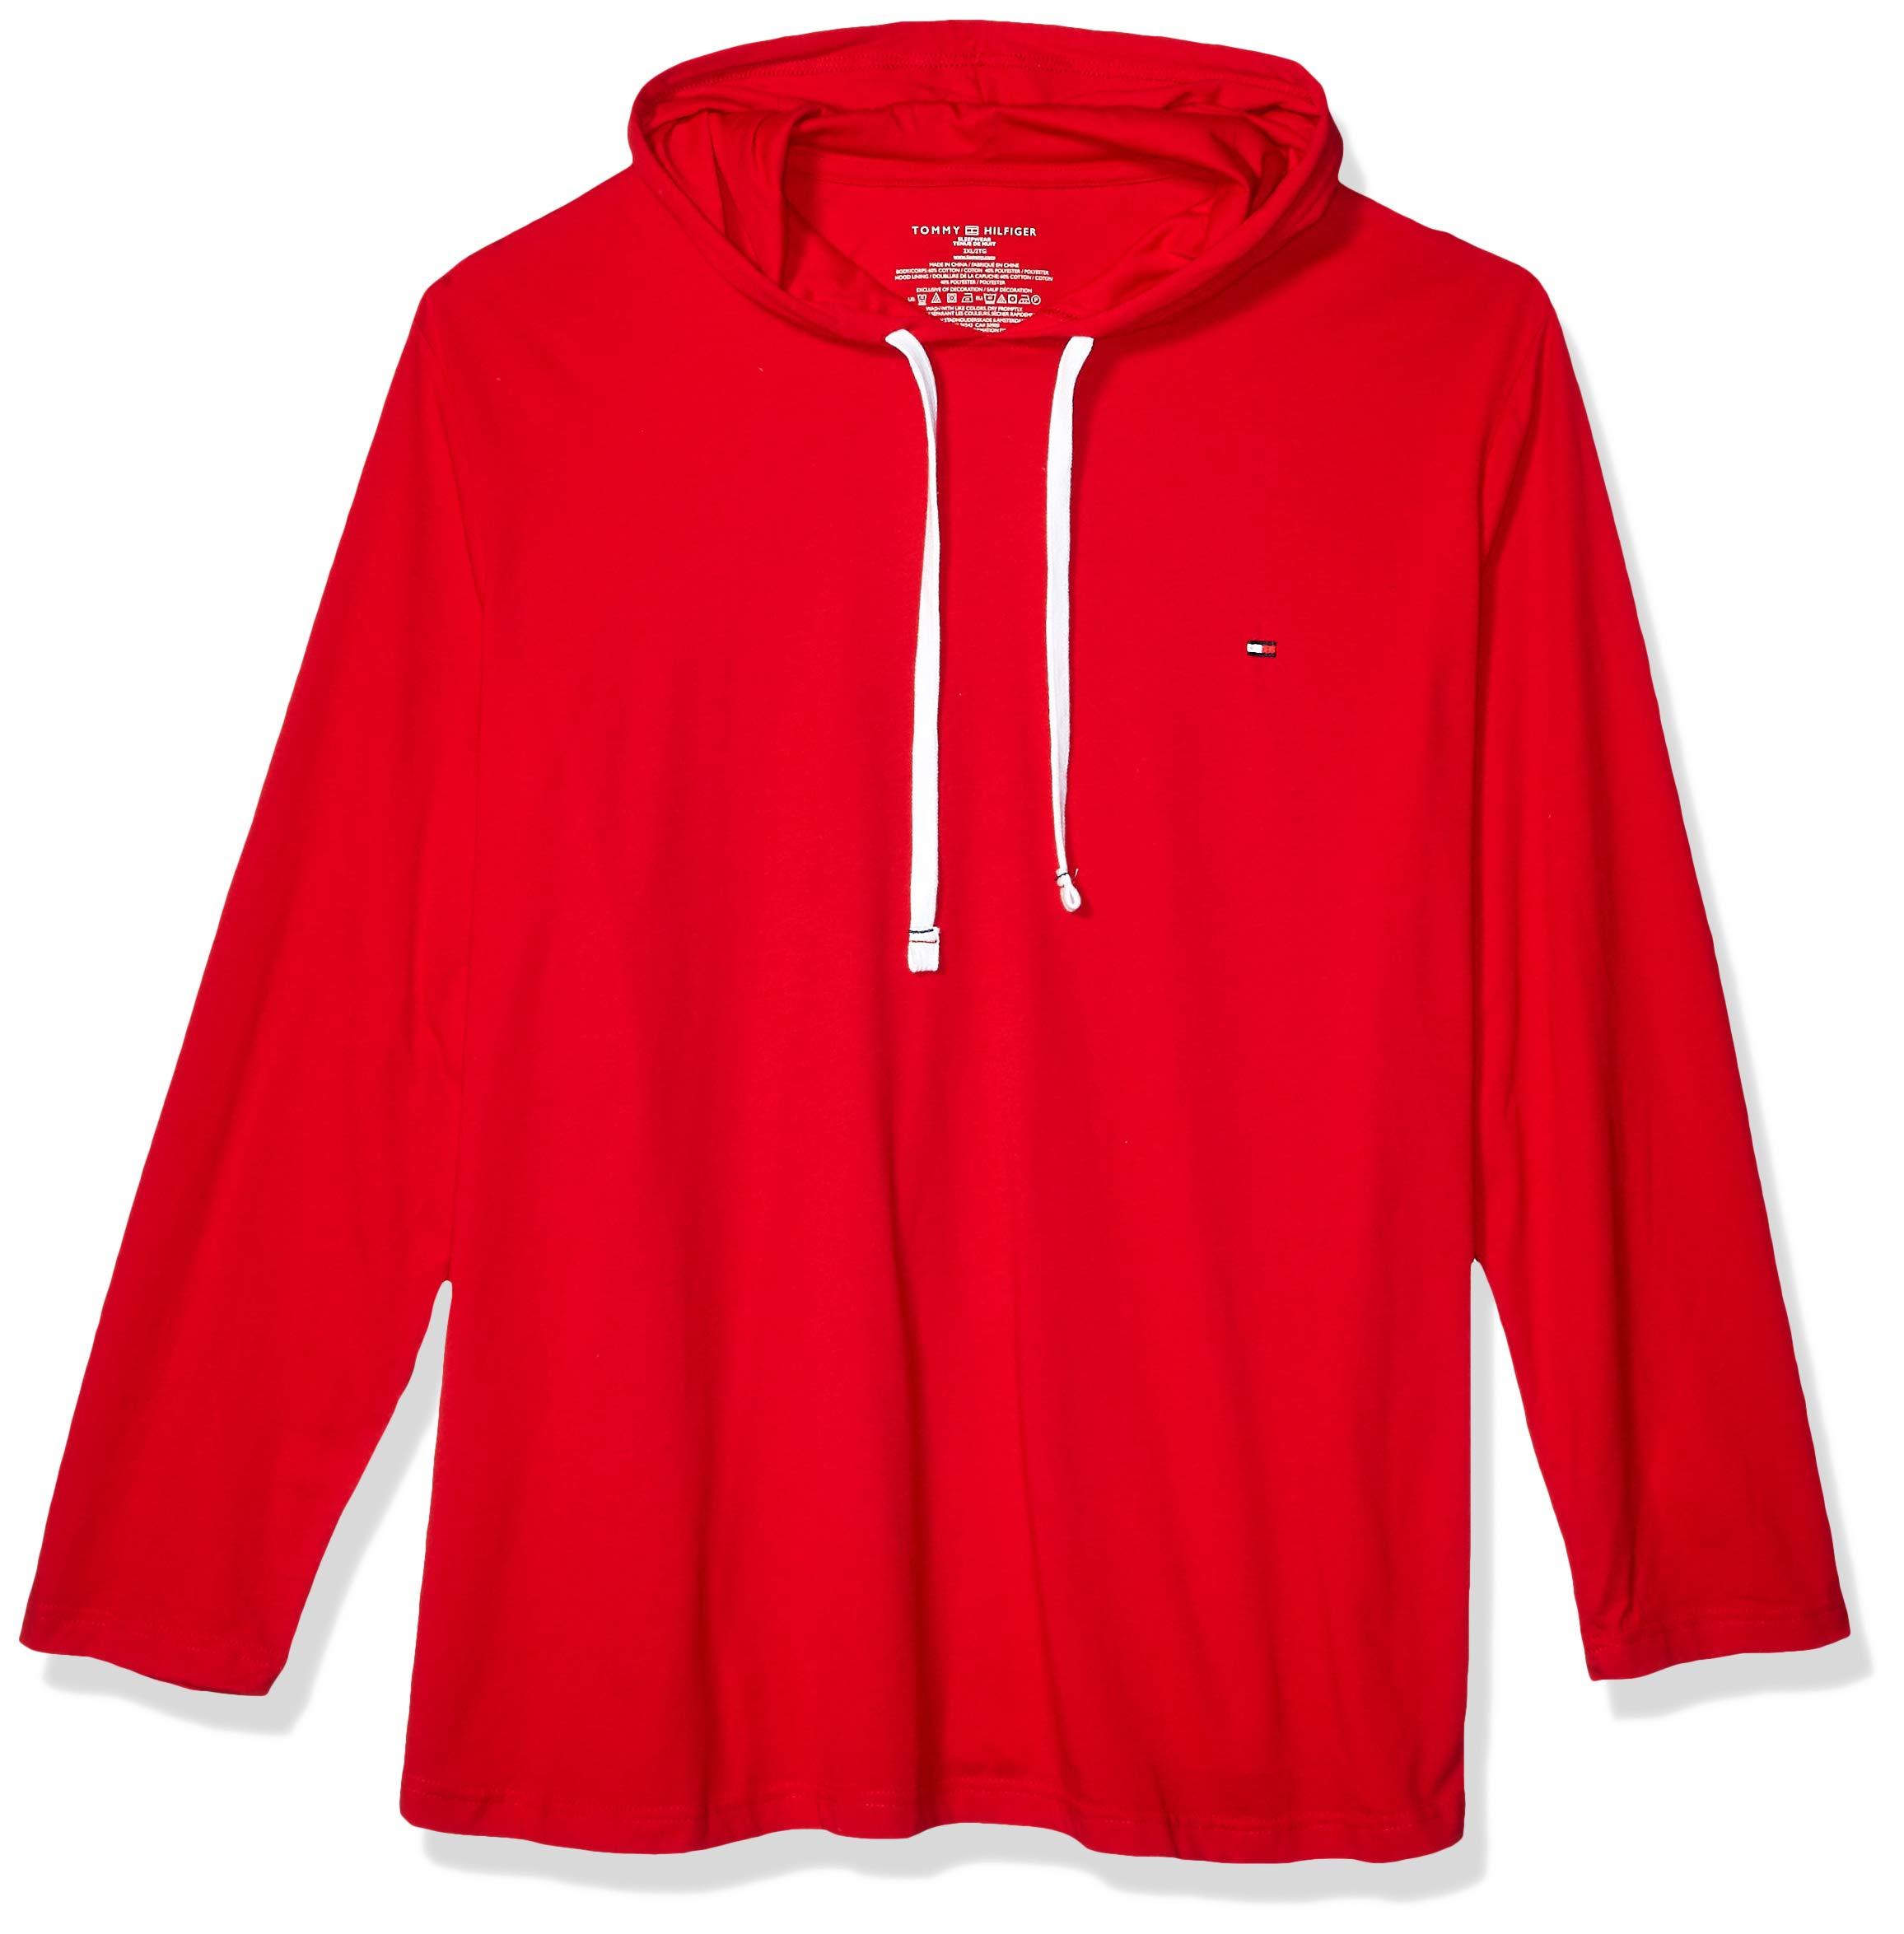 Tommy Hilfiger Big And Tall Hoodies Store - anuariocidob.org 1688639142